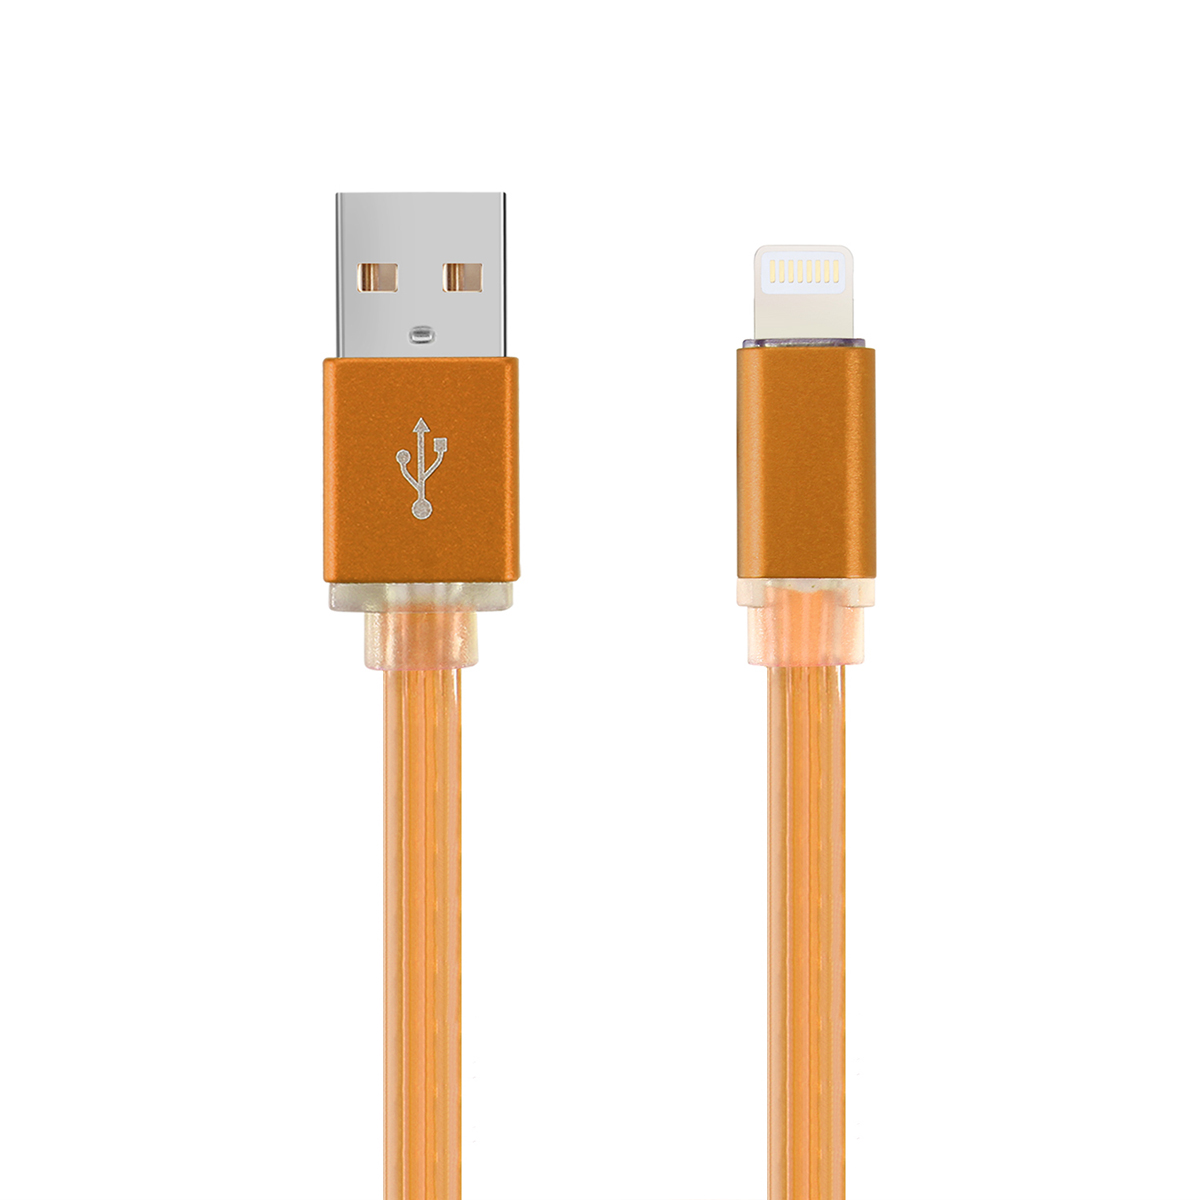 LED 8 pin USB Data Sync Stretche Charging Cable for iPhone 7 - Orange